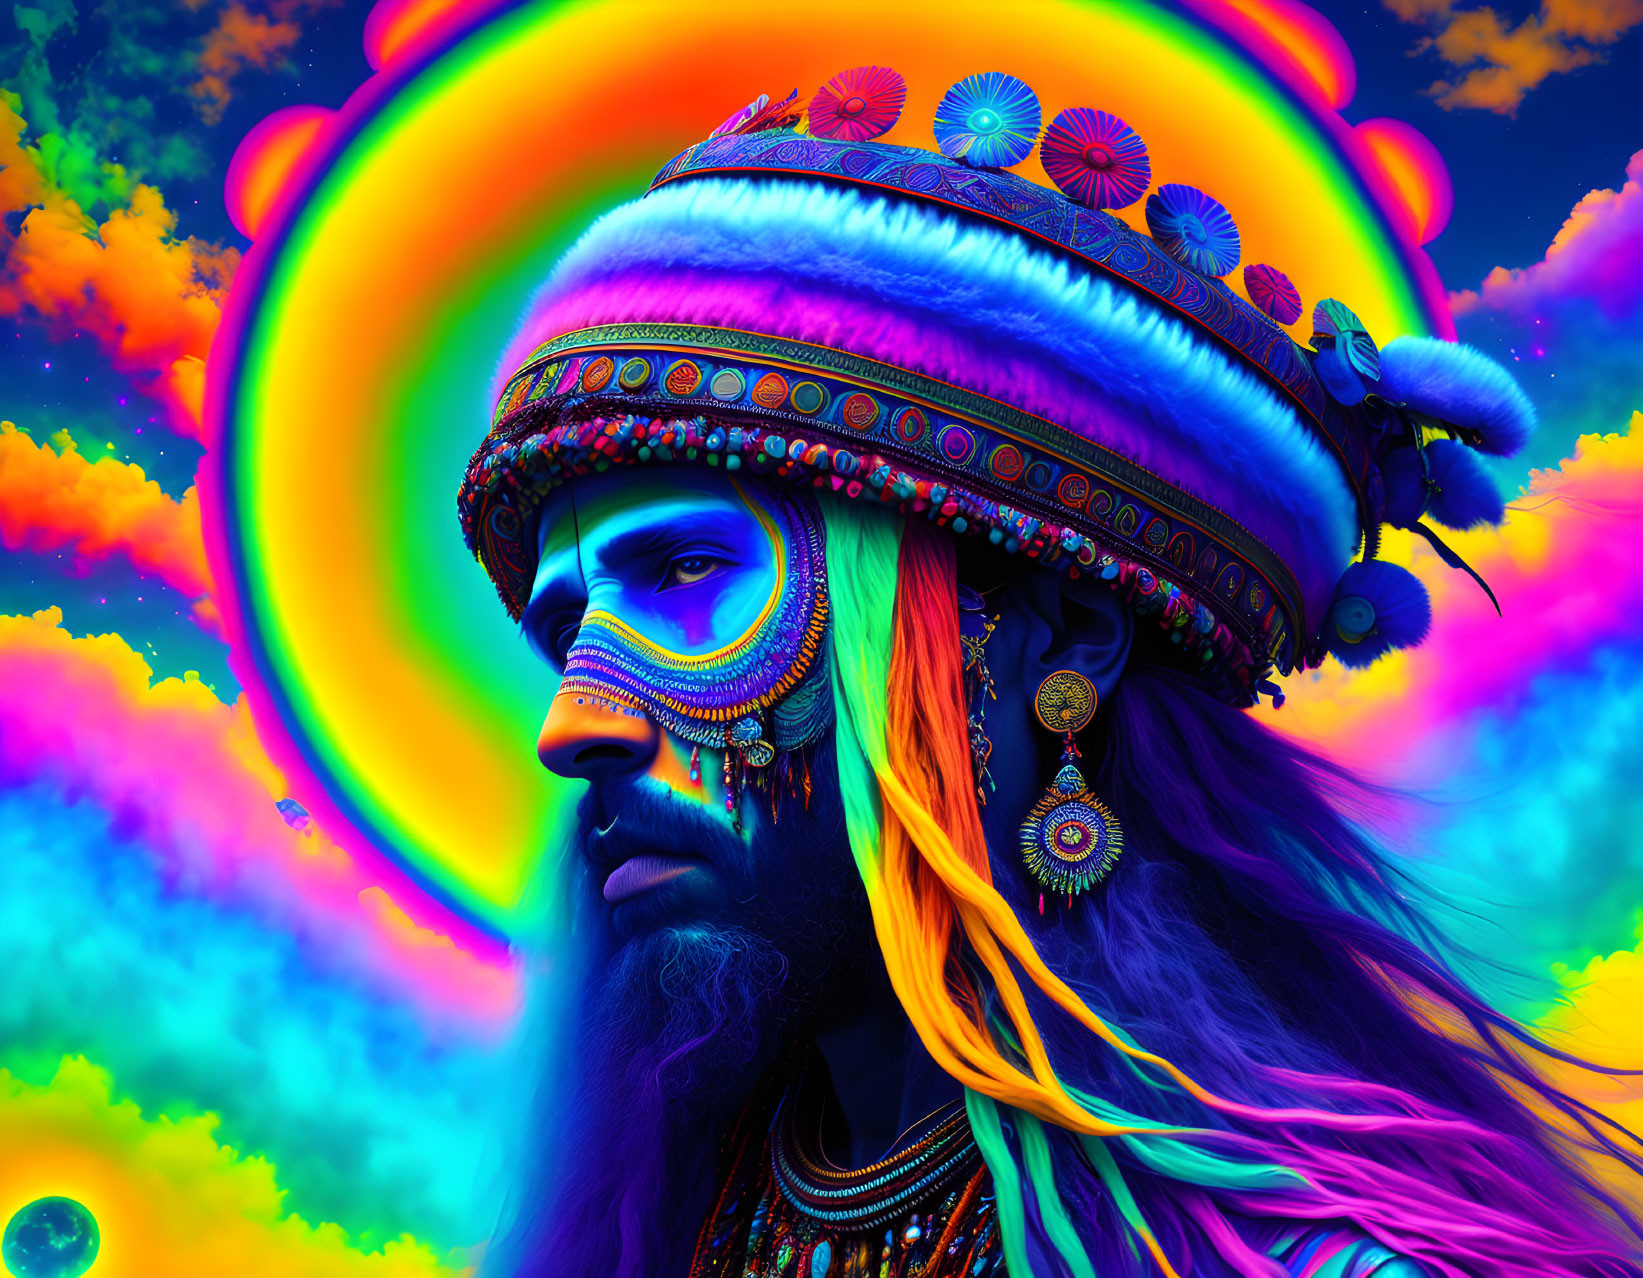 Colorful Portrait of Man with Tribal Face Paint and Headdress on Psychedelic Background